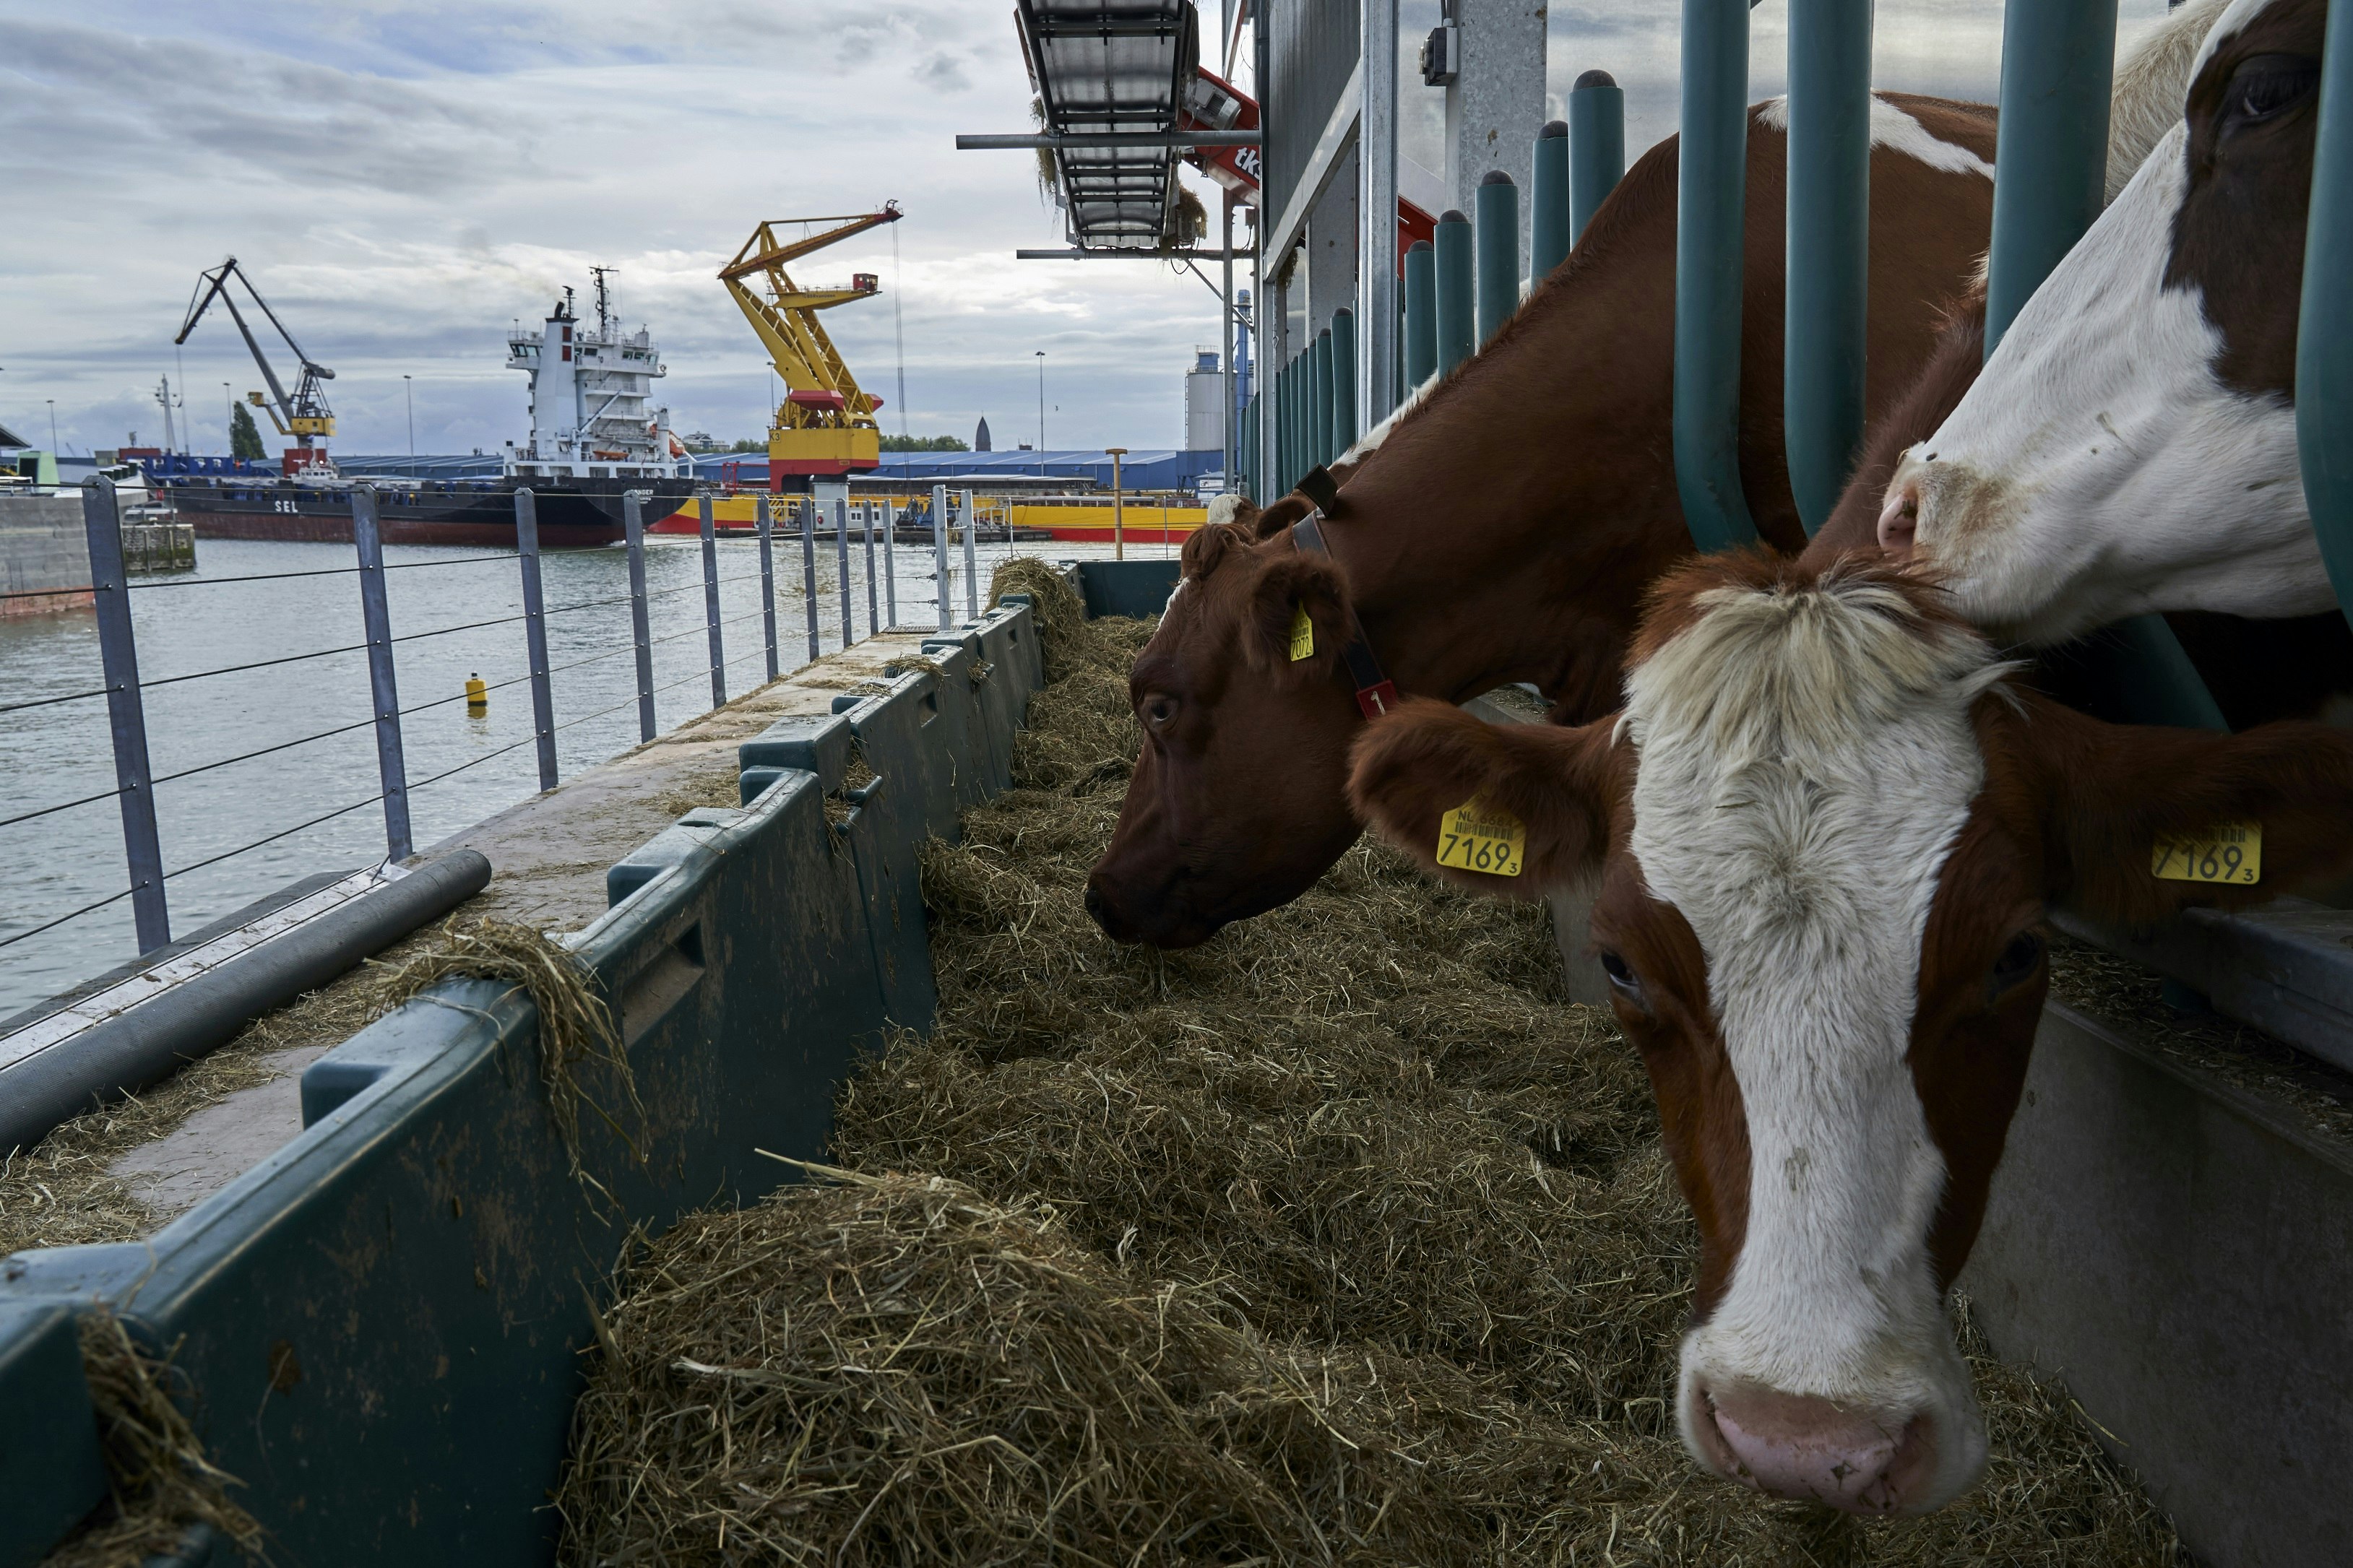 Three cows eat hay from a food trough on a floating farm in Rotterdam. In the background the harbour waters are visible, along with ships and cranes.